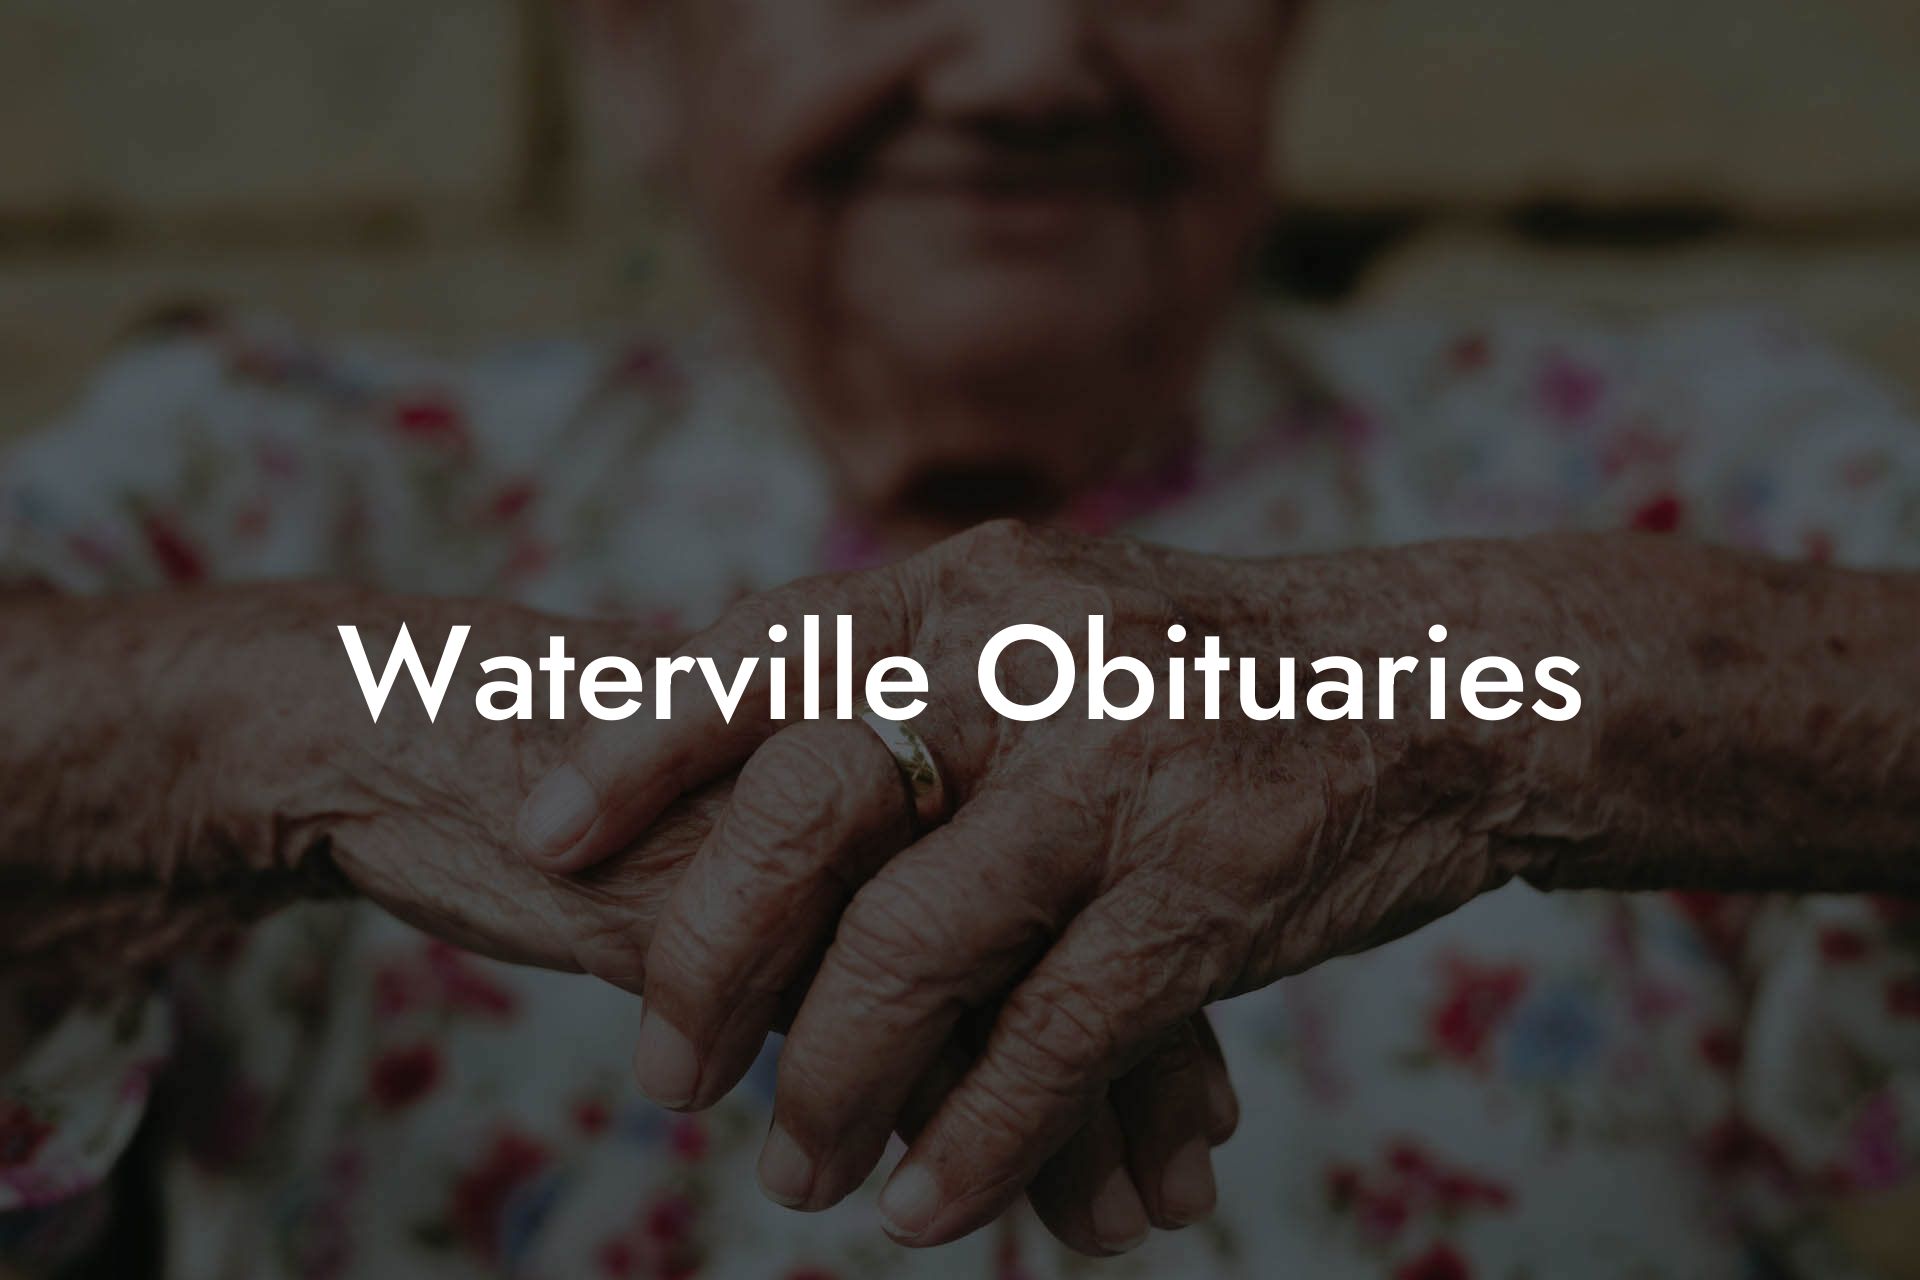 Waterville Obituaries